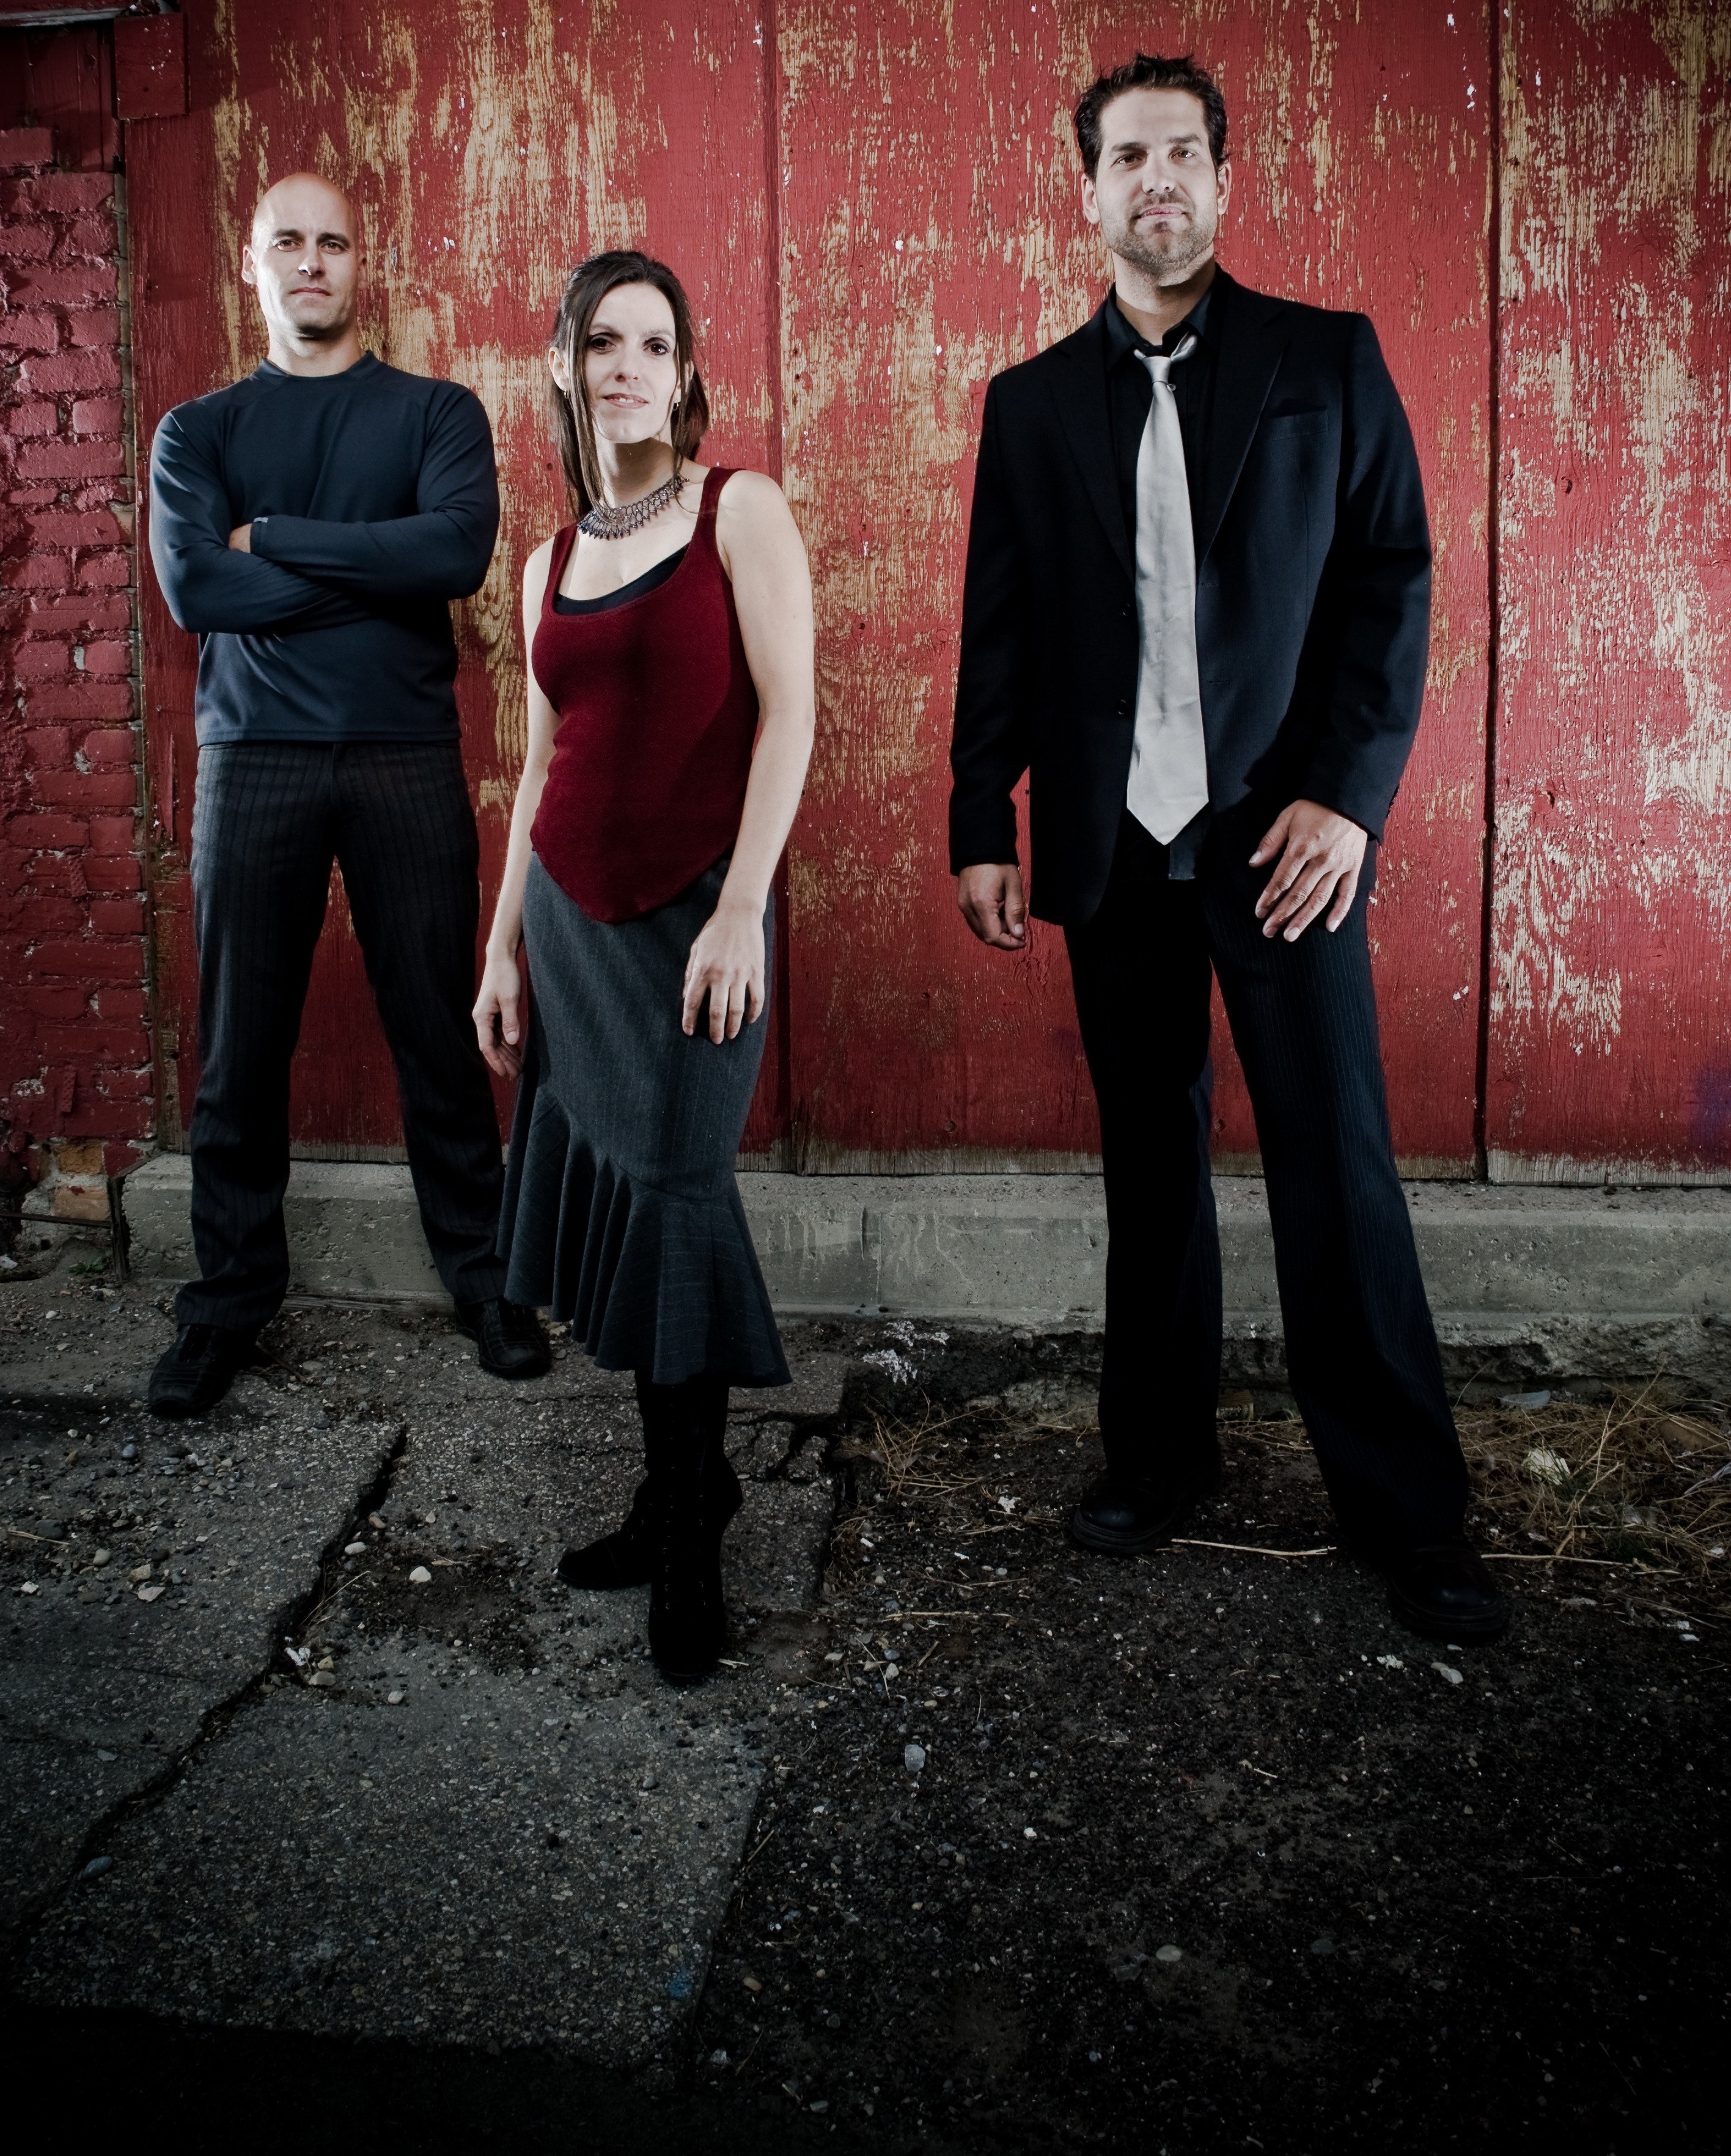 SEARING SOUNDS- Bluessmyth has been creating superb blues-oriented tunes for several years now. They perform at Alberta’s Own Independent Music Festival on July 17.